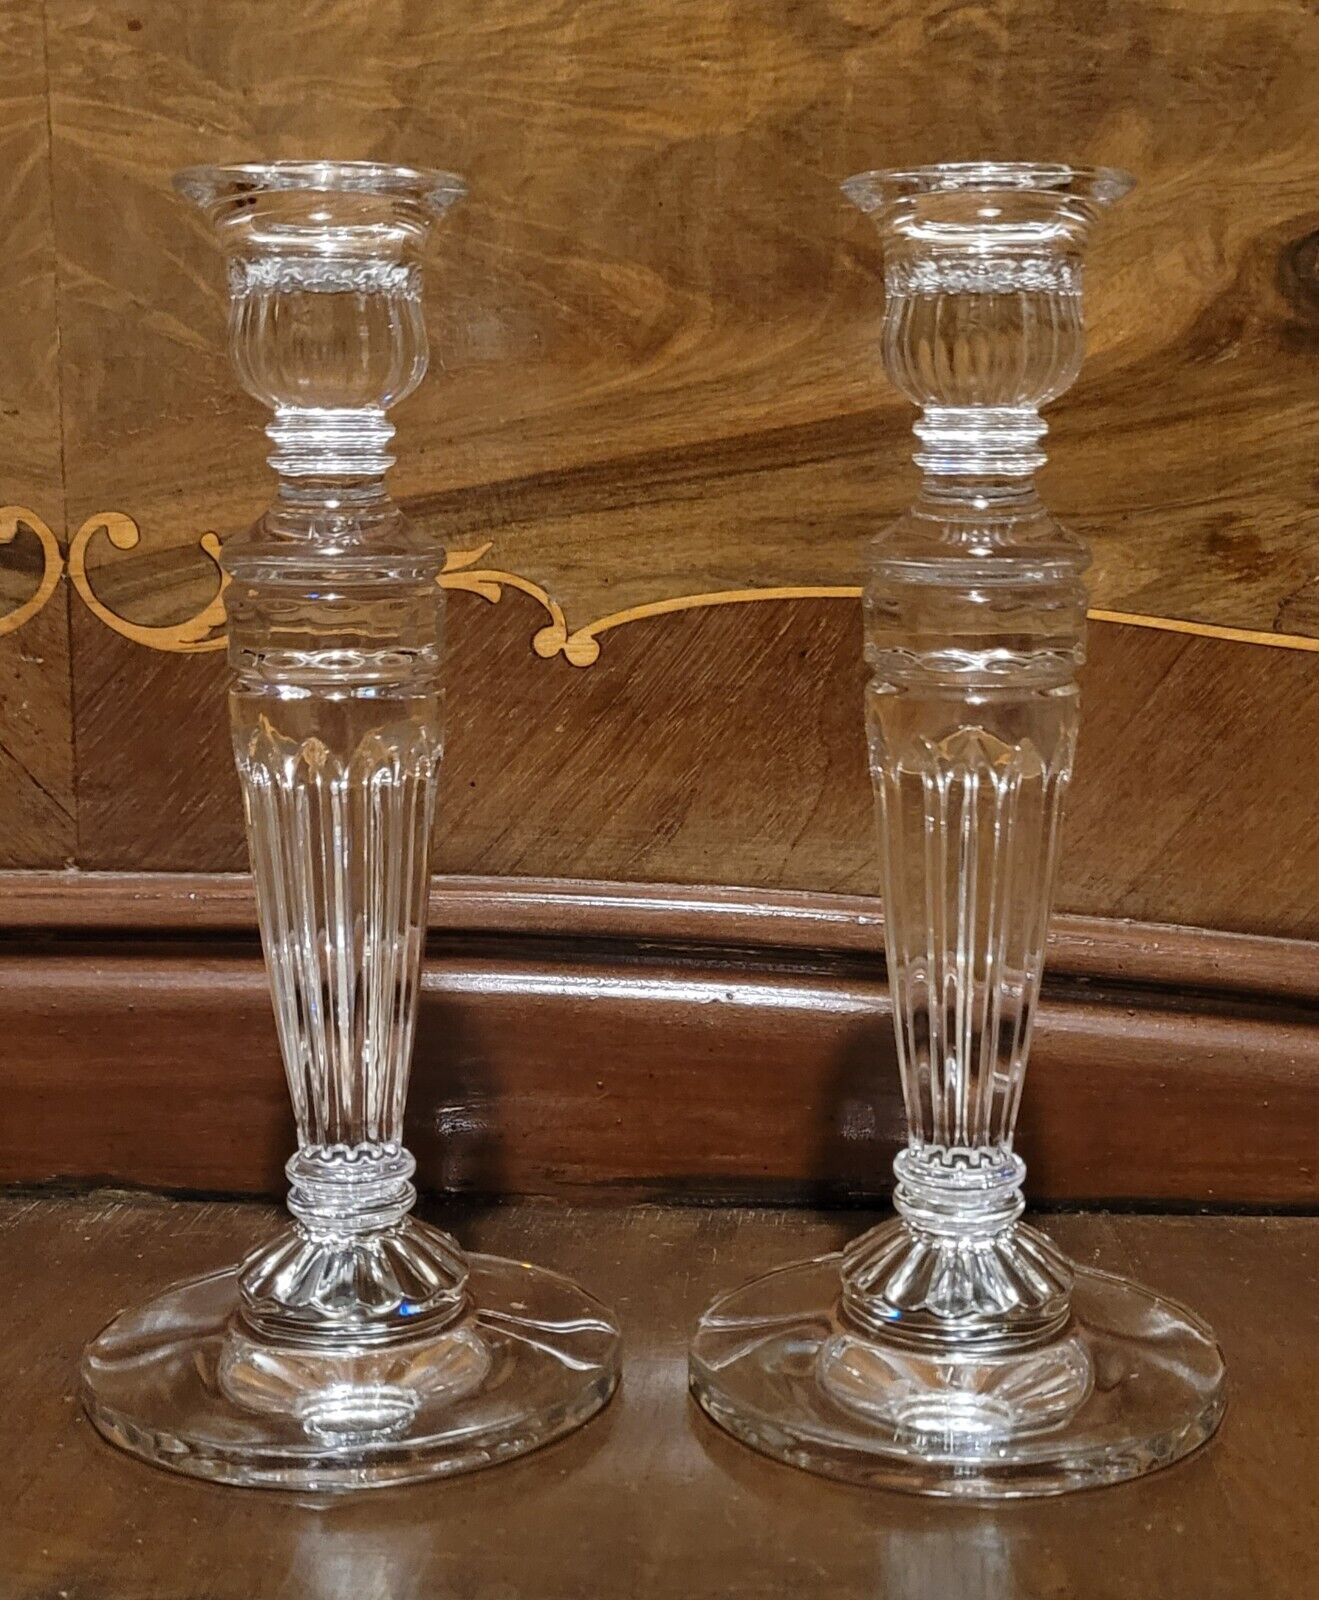 SALE 30% OFF Pair Vintage Clear Glass Candle Sticks / Holders - 7\